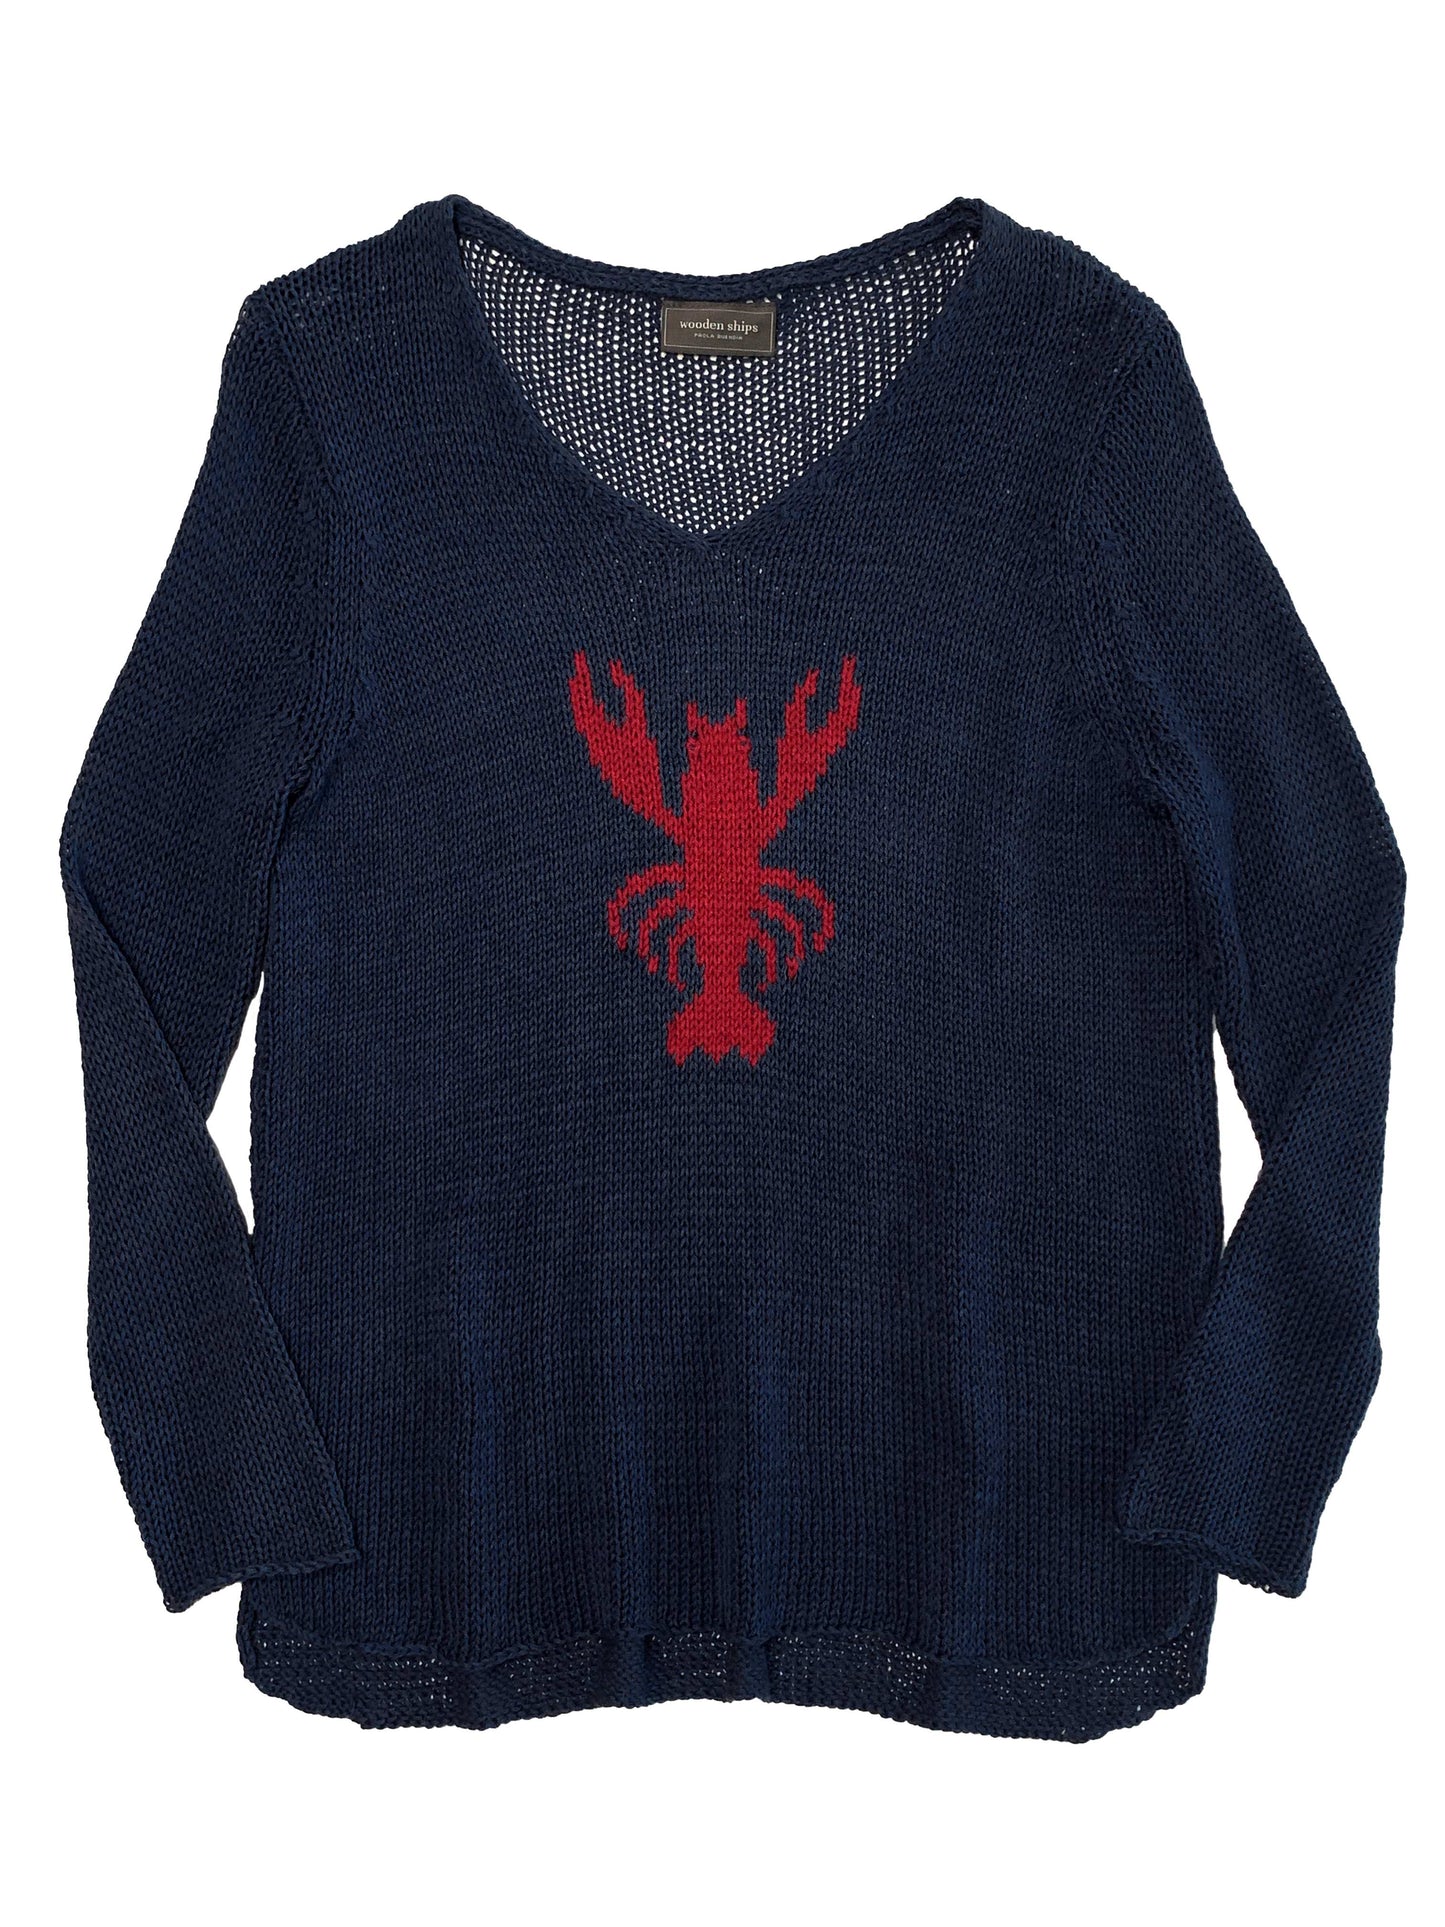 Wooden Ships Lobster Sweater